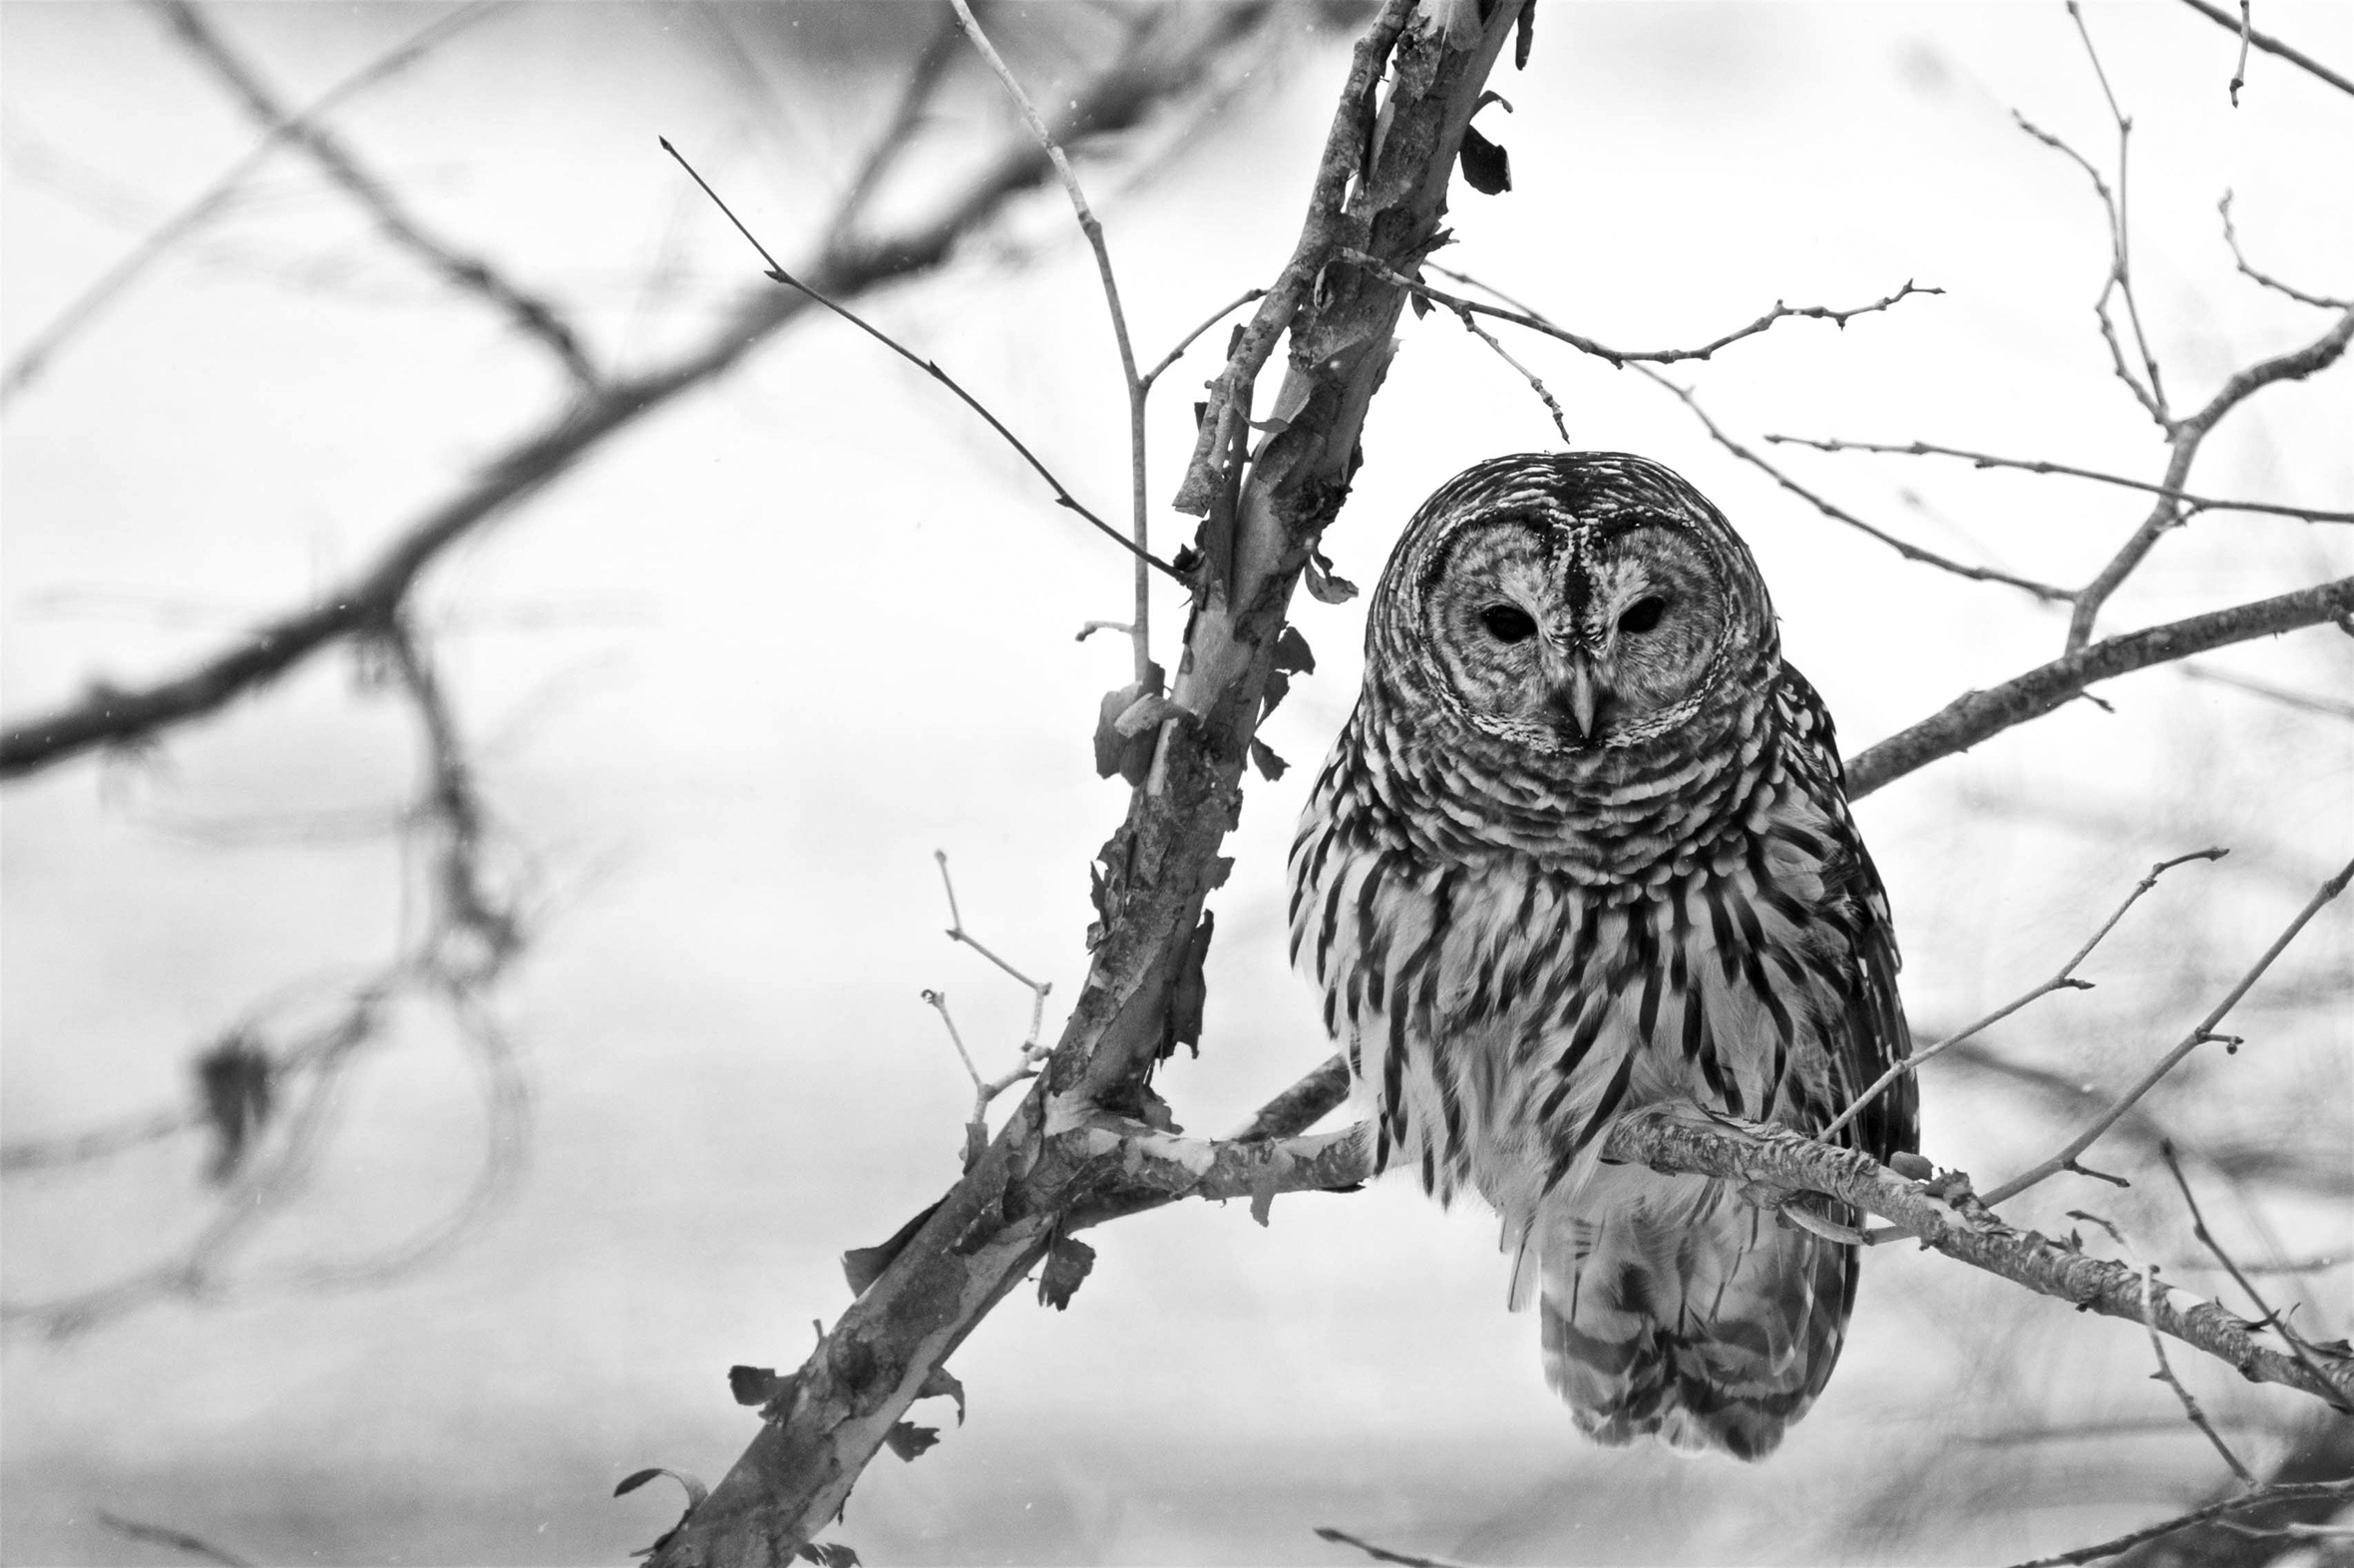 A barred owl perches in a winter-bare tree at Lone Elk Park in St. Louis County, Missouri, as snow begins to fall.